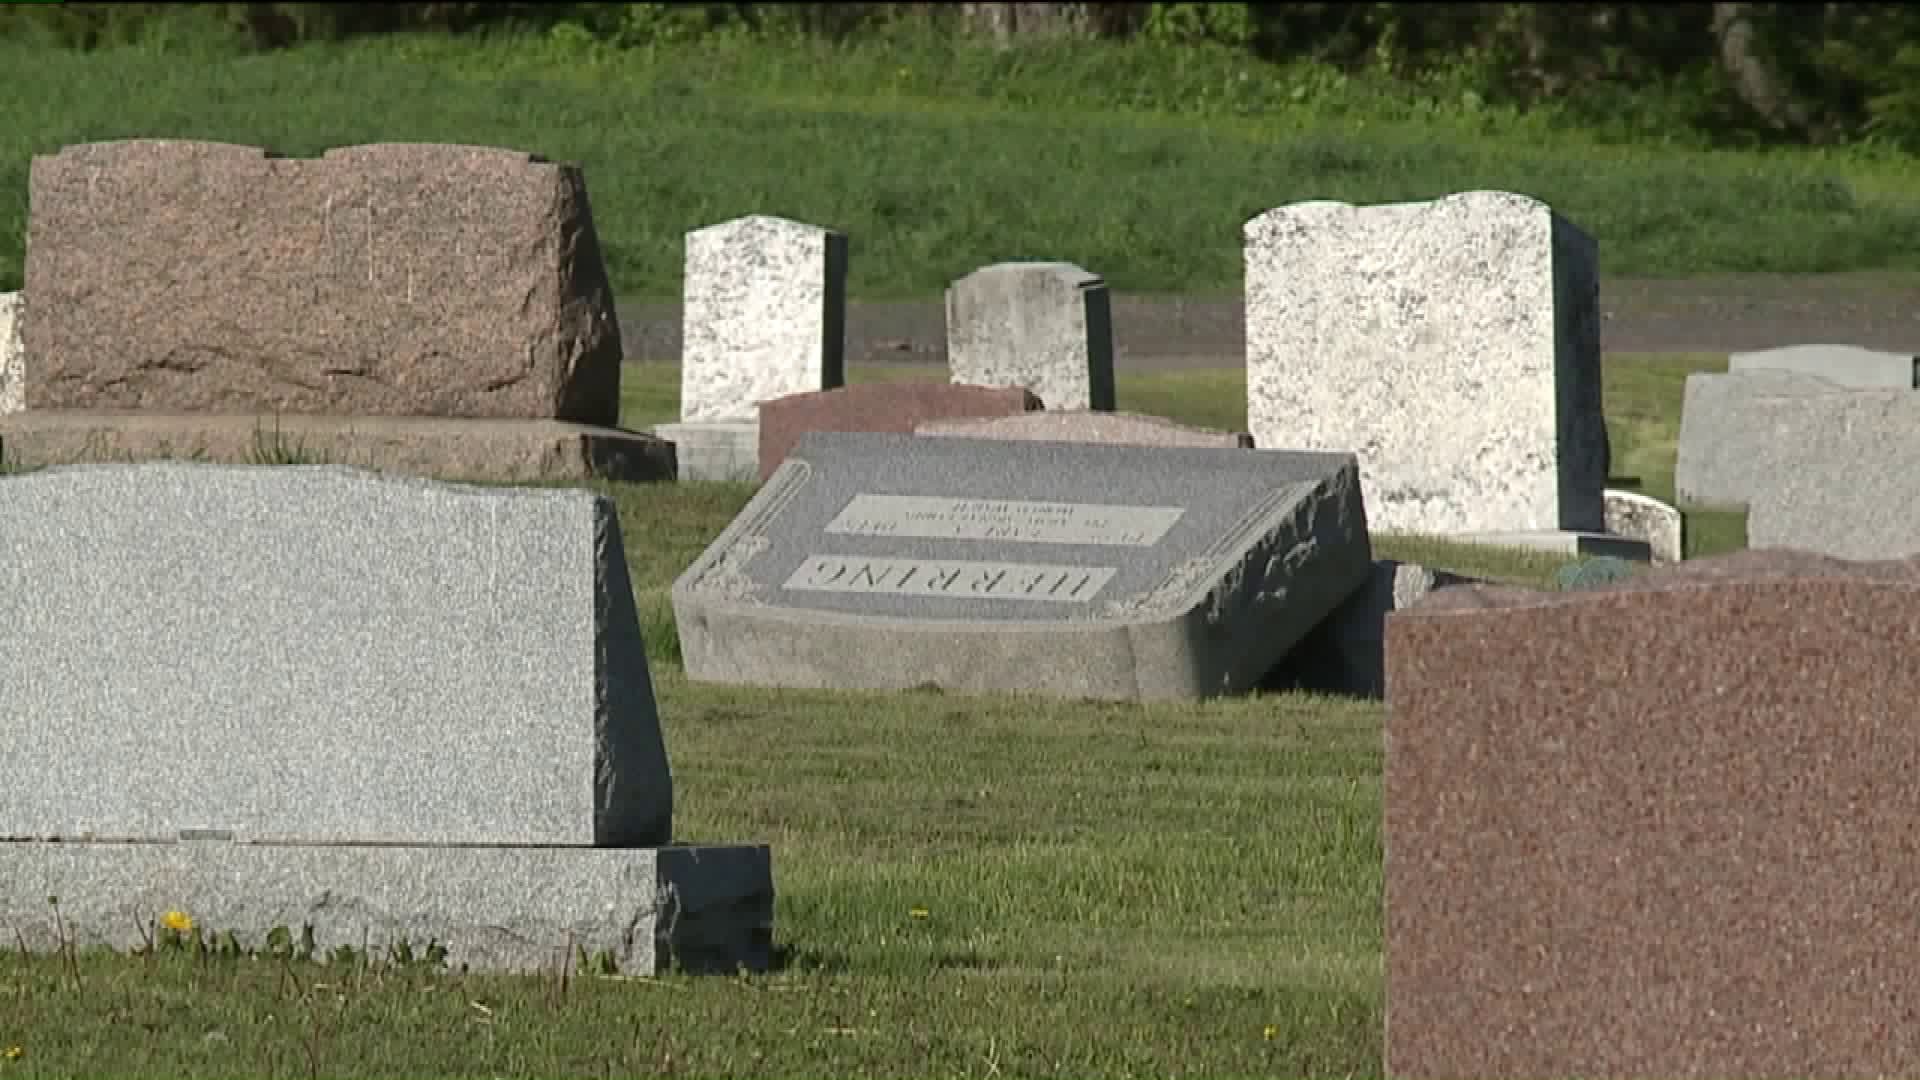 Community Angry After Tombstones Toppled in Cemetery